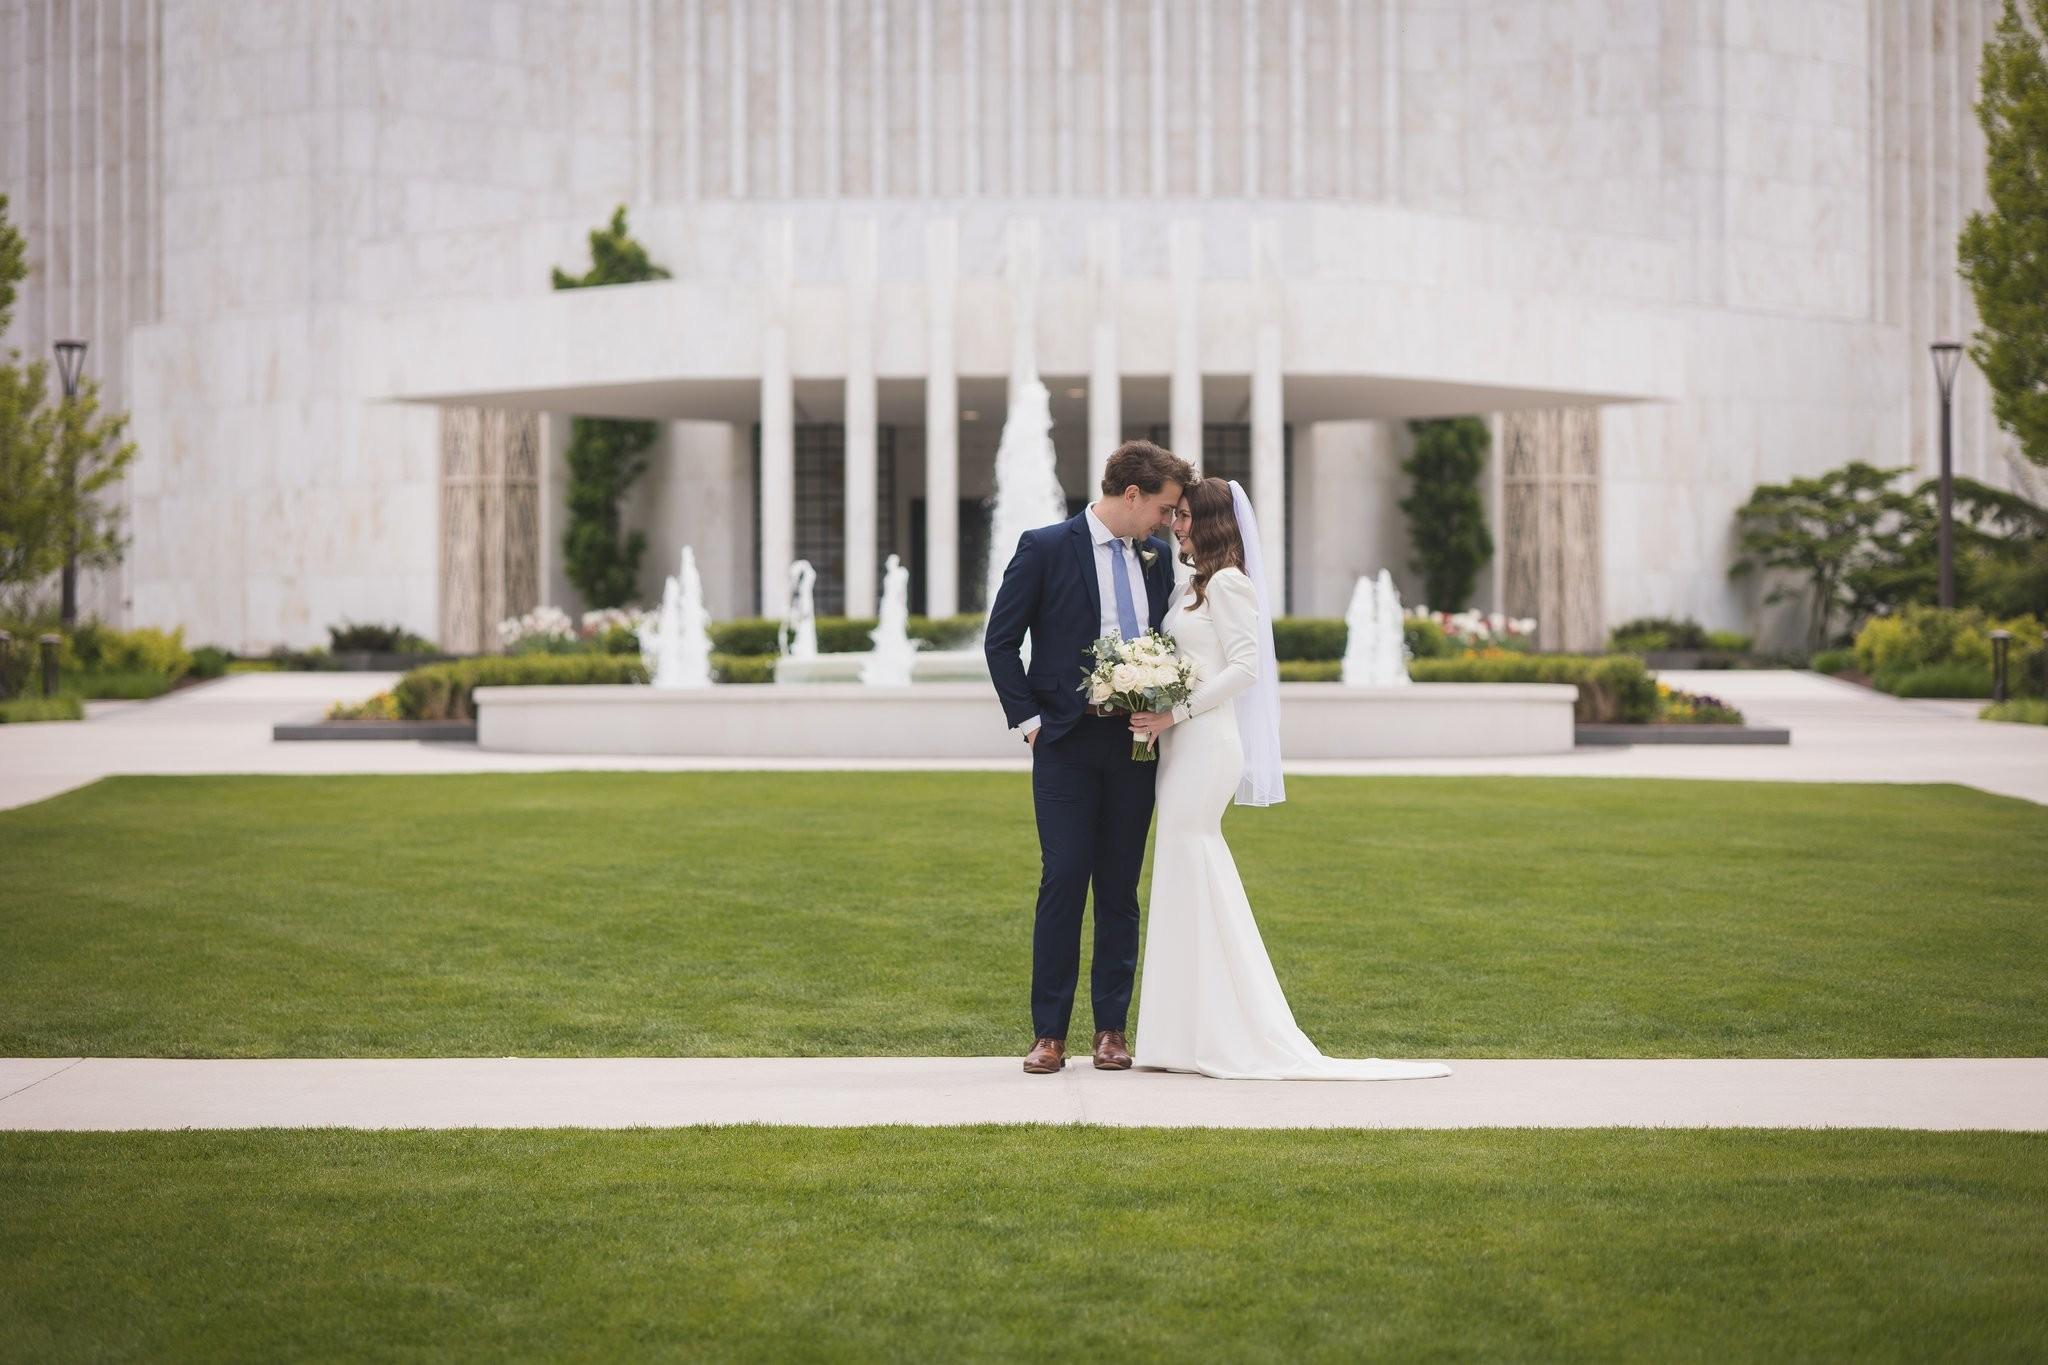 Top-rated Wedding Photography Packages in D.C. for 2025 Couples